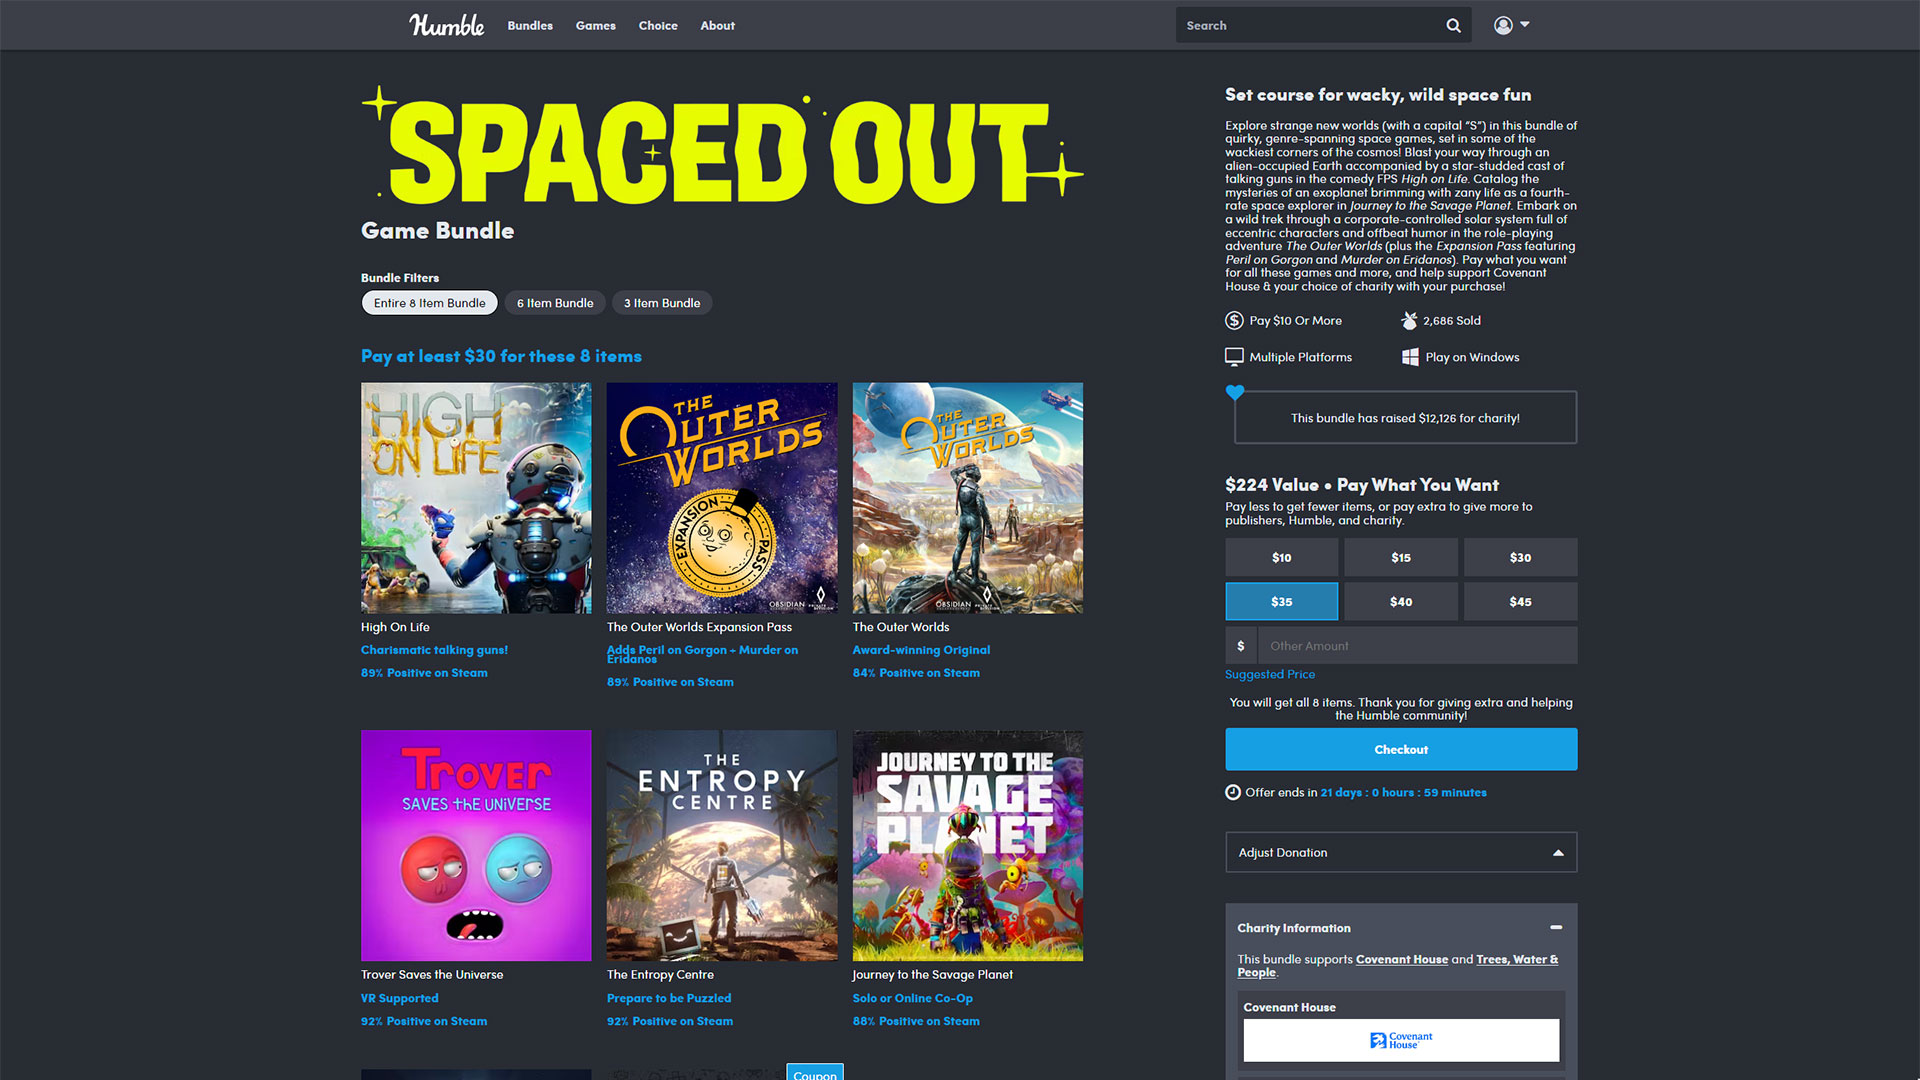 The Spaced Out Bundle is available at Humble for the next three weeks